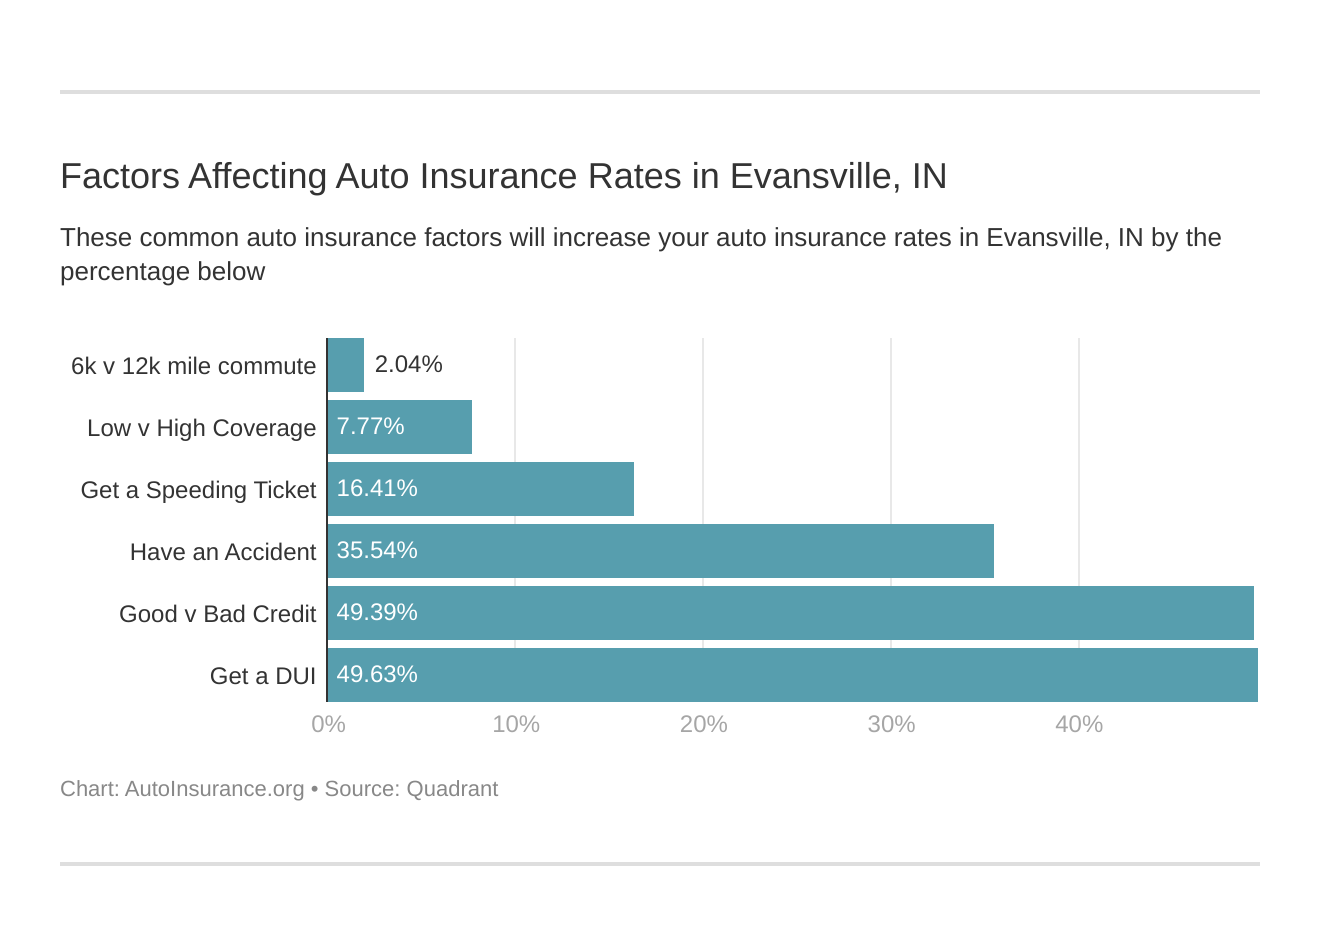 Factors Affecting Auto Insurance Rates in Evansville, IN